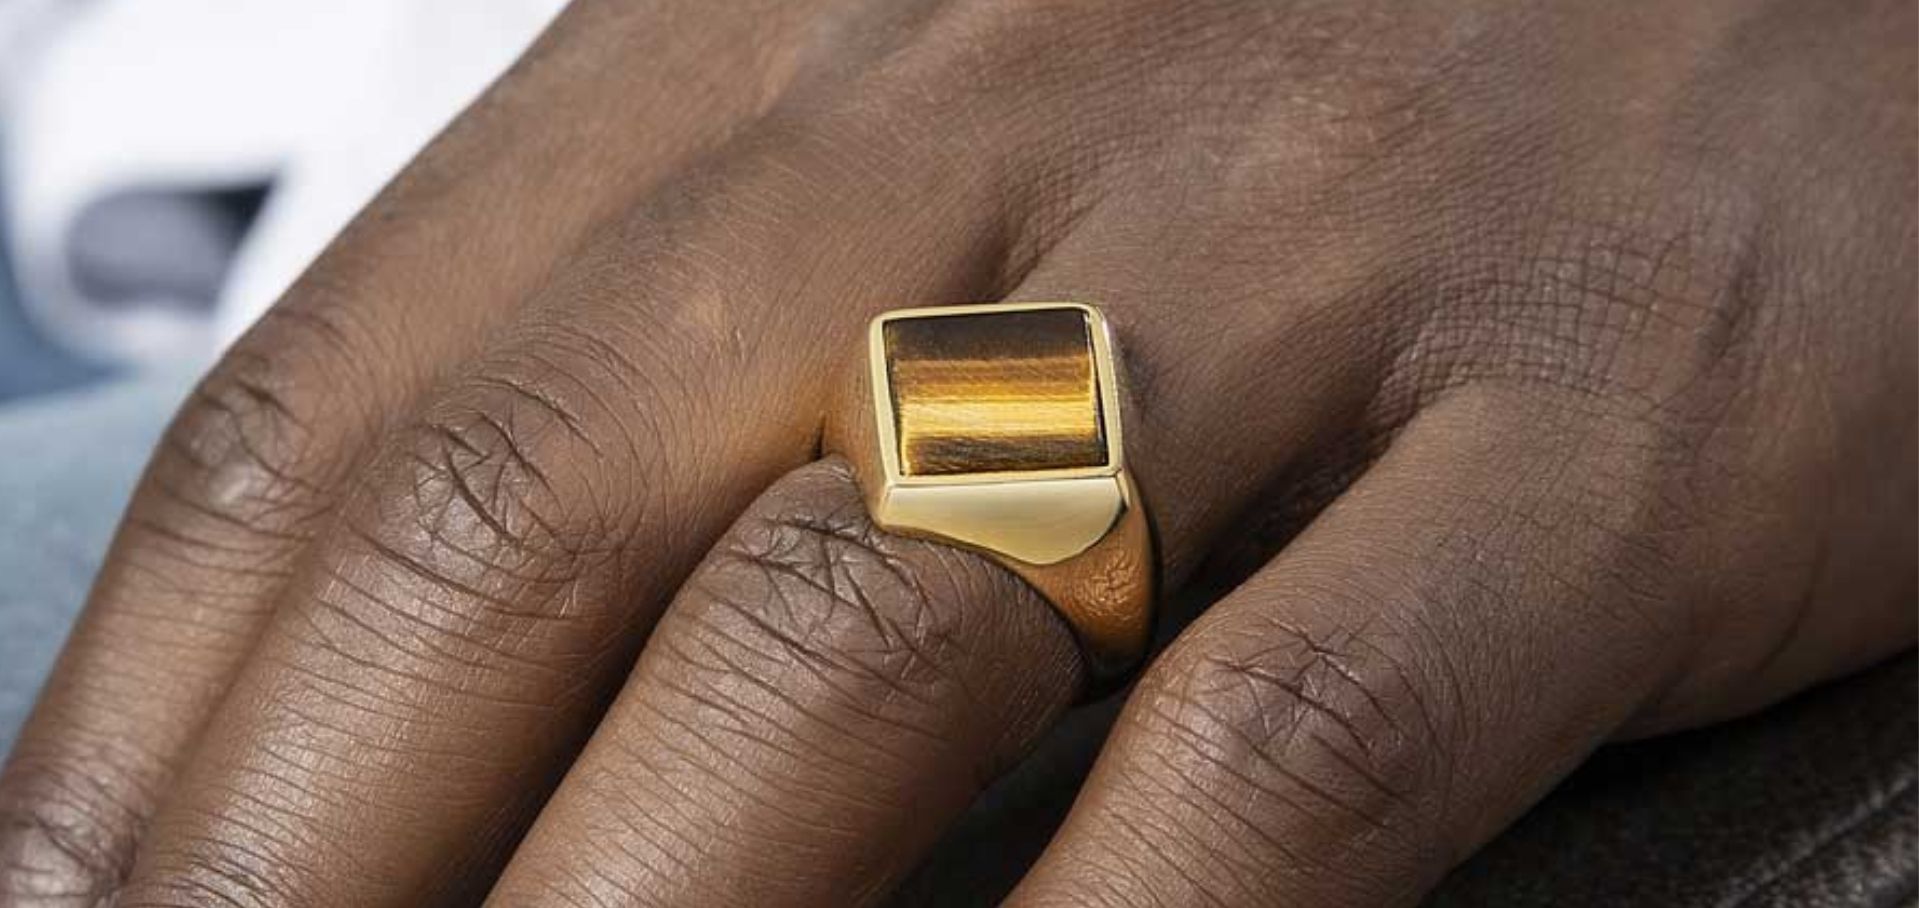 7 Reasons to Wear a Tiger Eye Ring